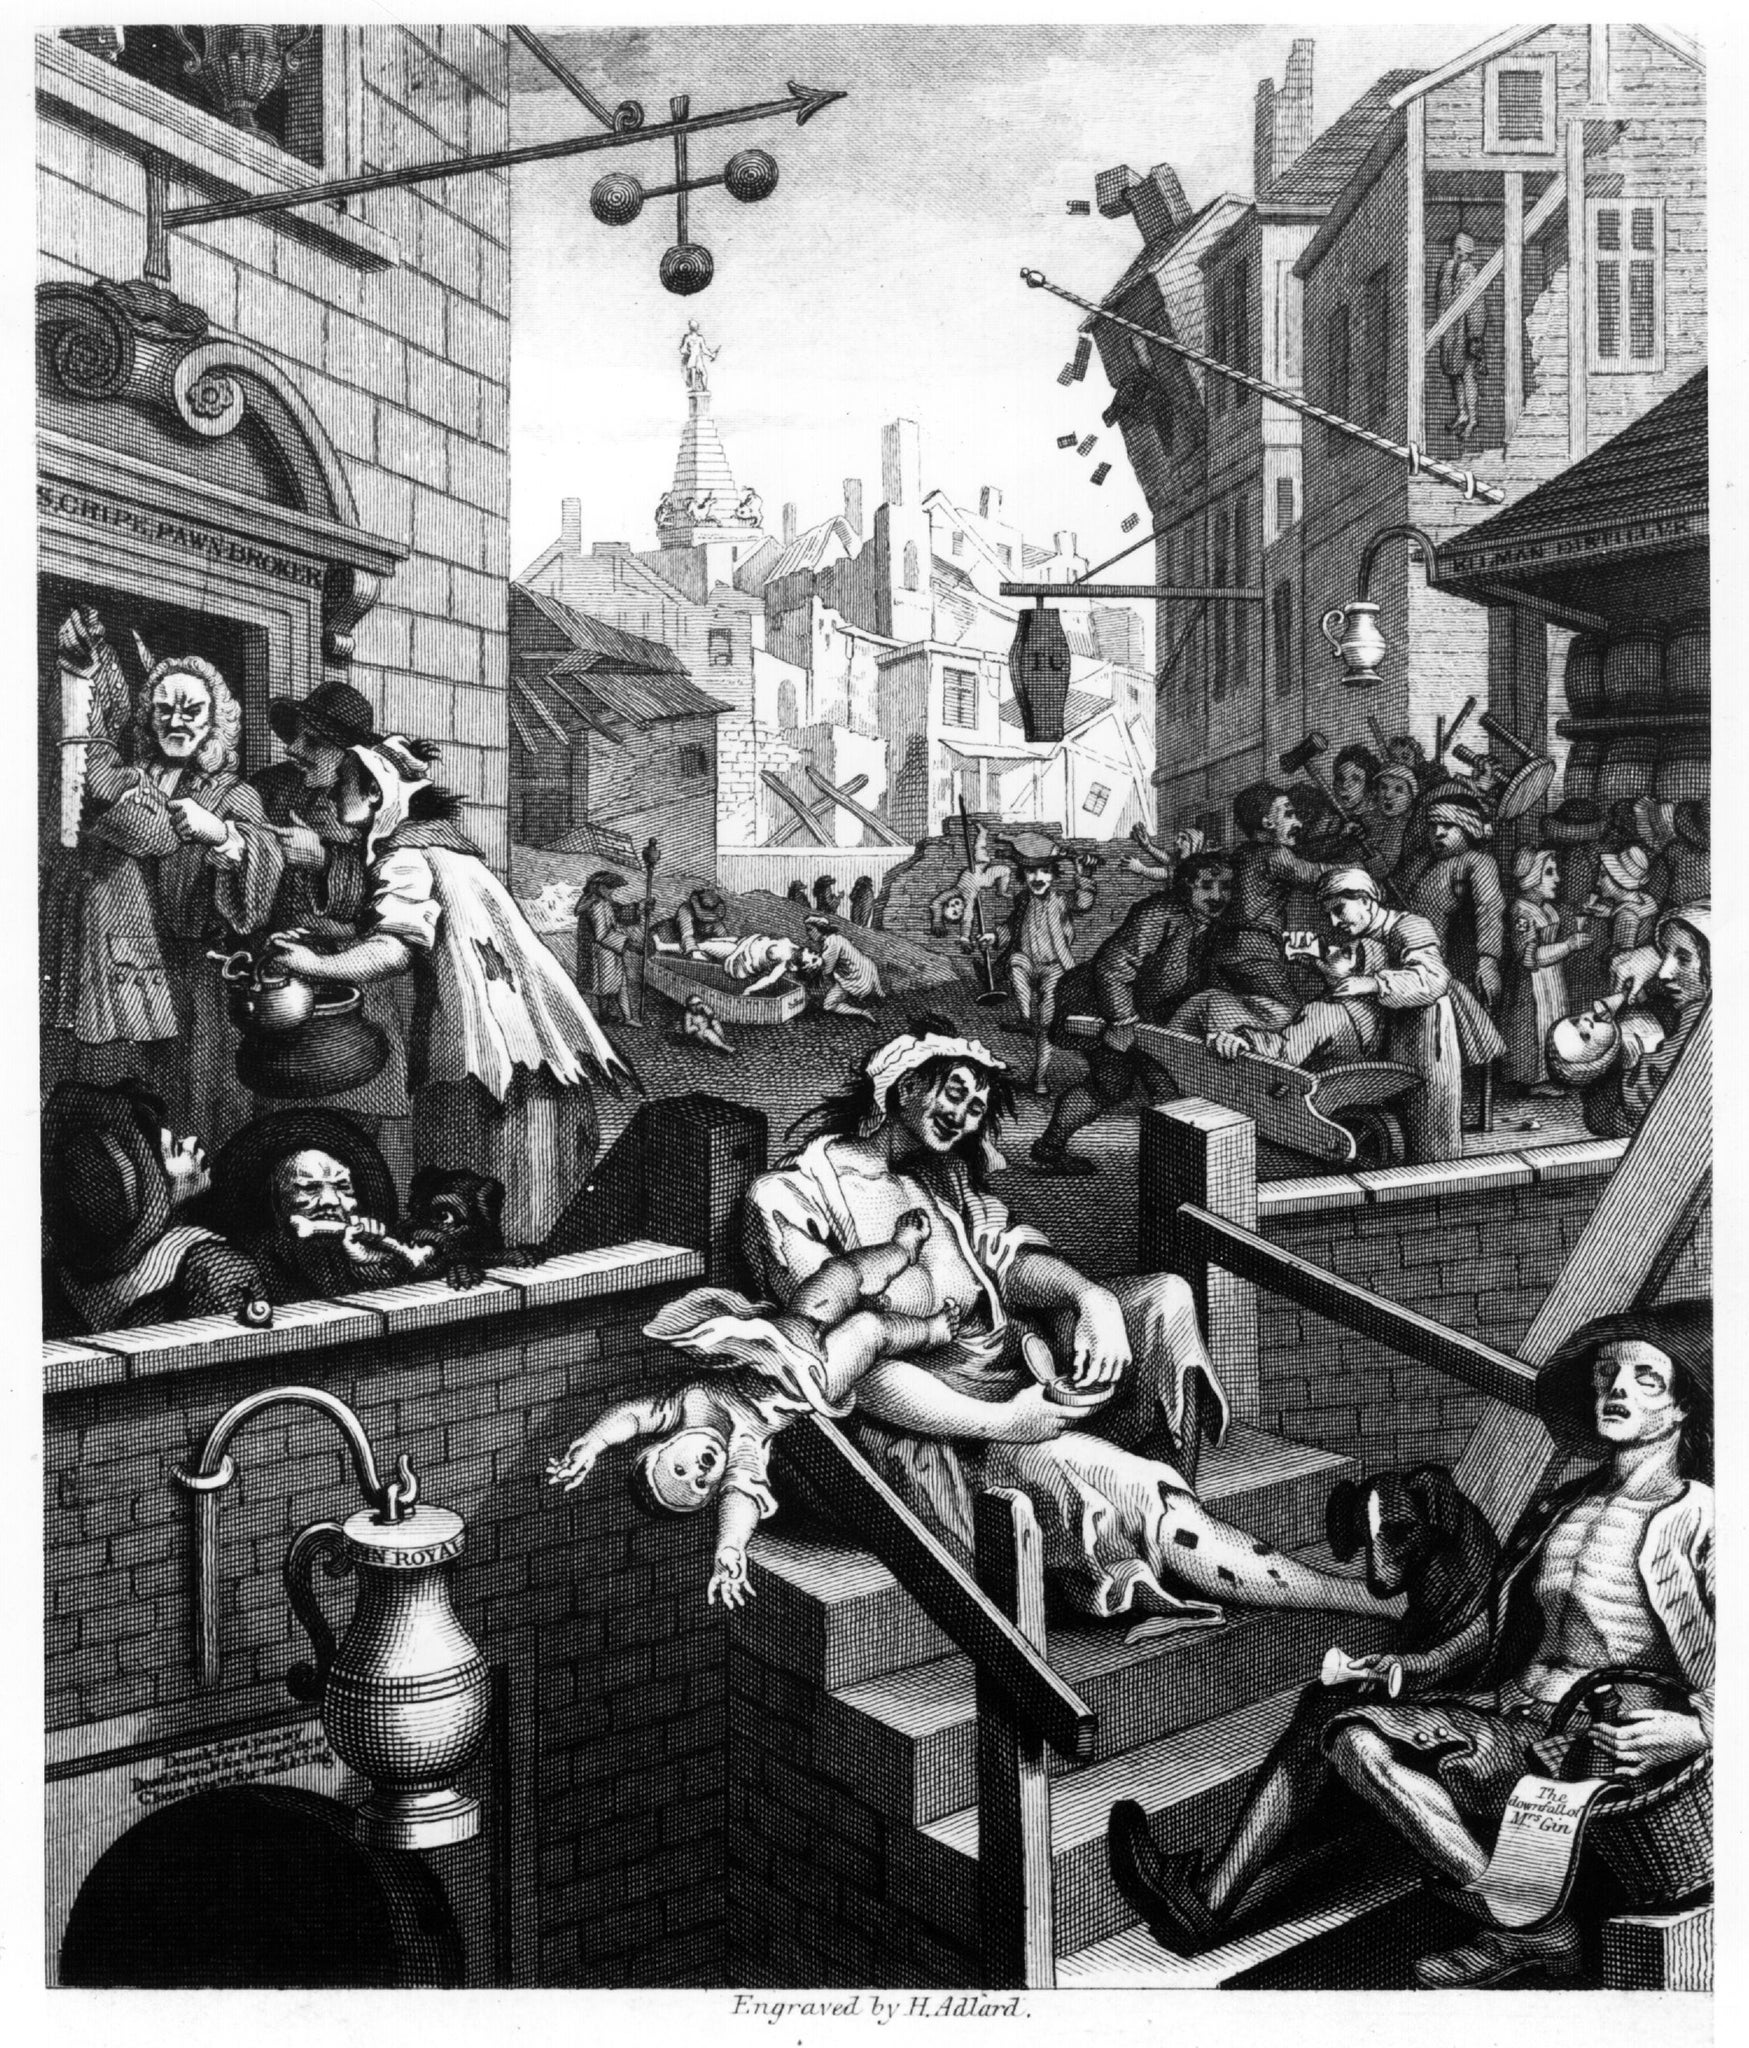 Gin’s poor reputation was often characterised in the 18th century